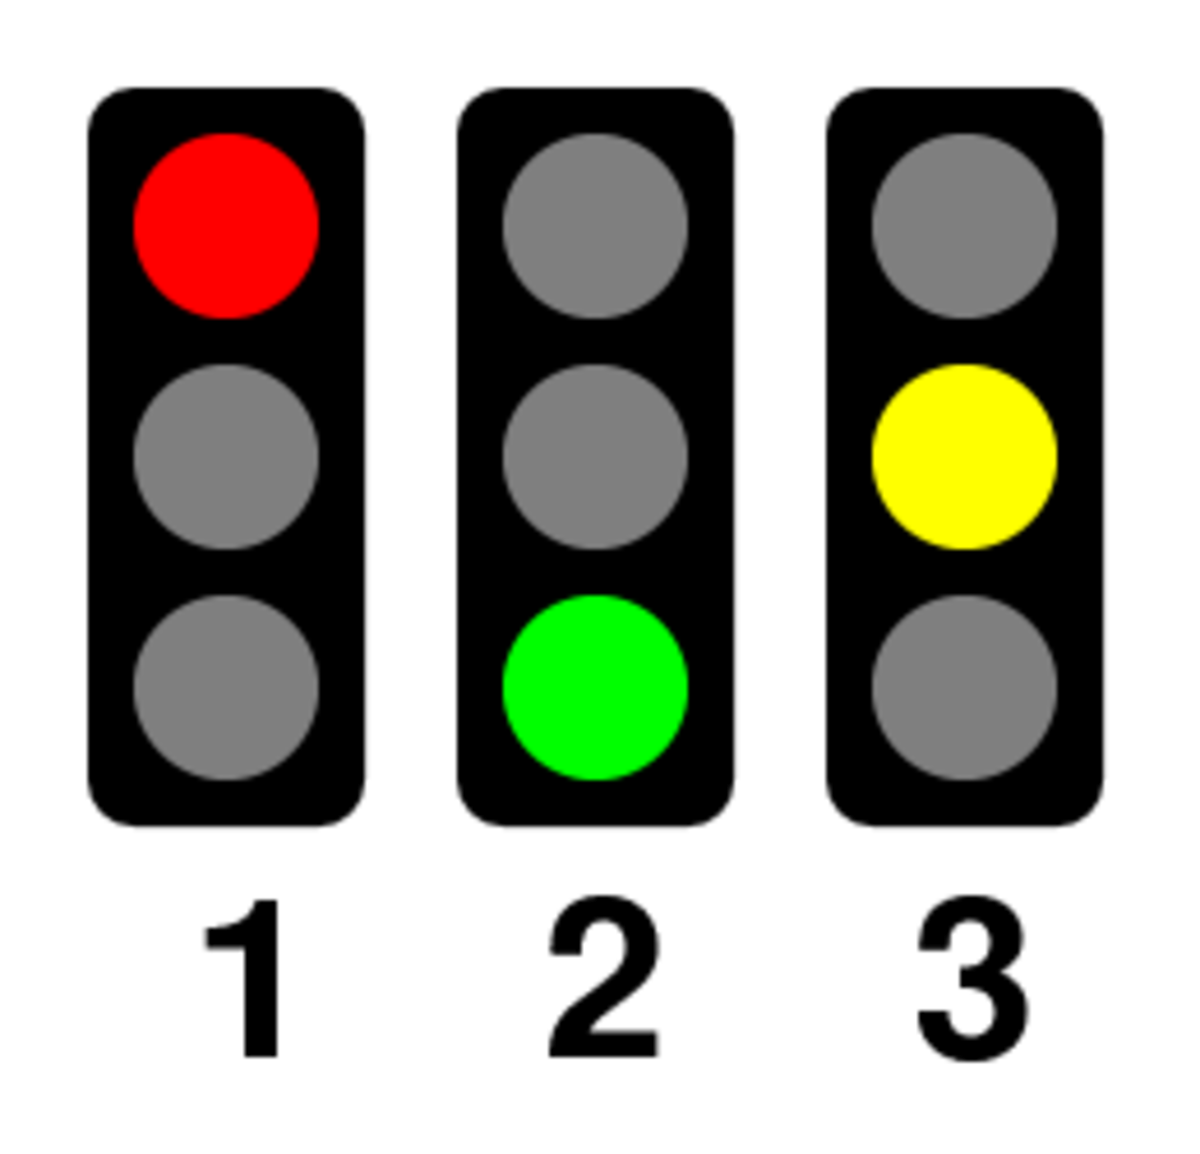 Traffic lights are designed to create Nash equilibria.